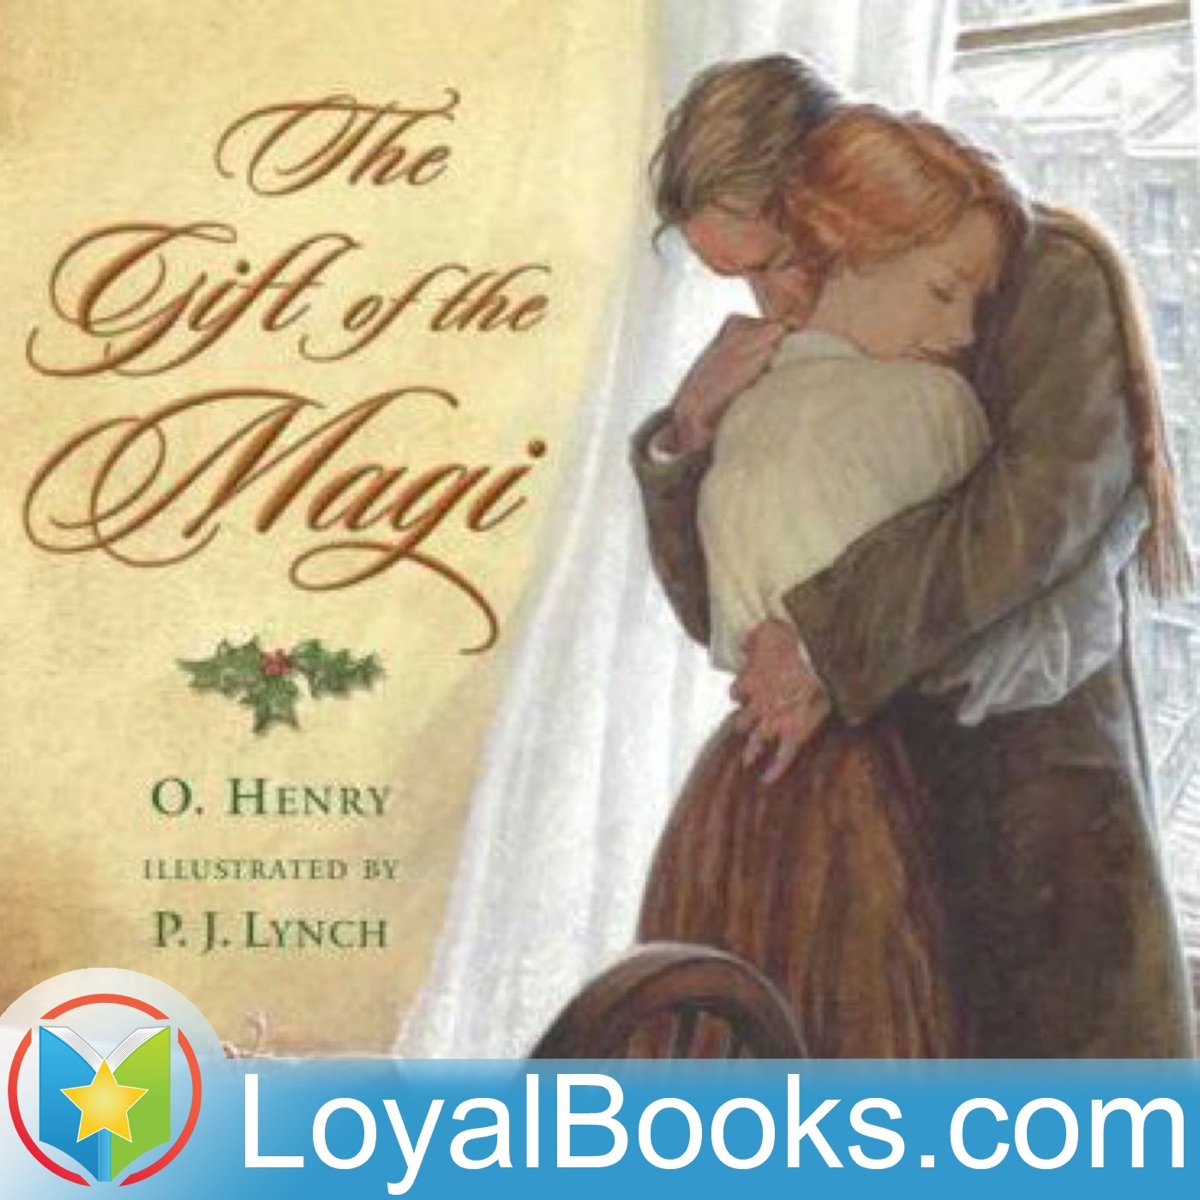 The Gift of the Magi by O. Henry and P. J. Lynch